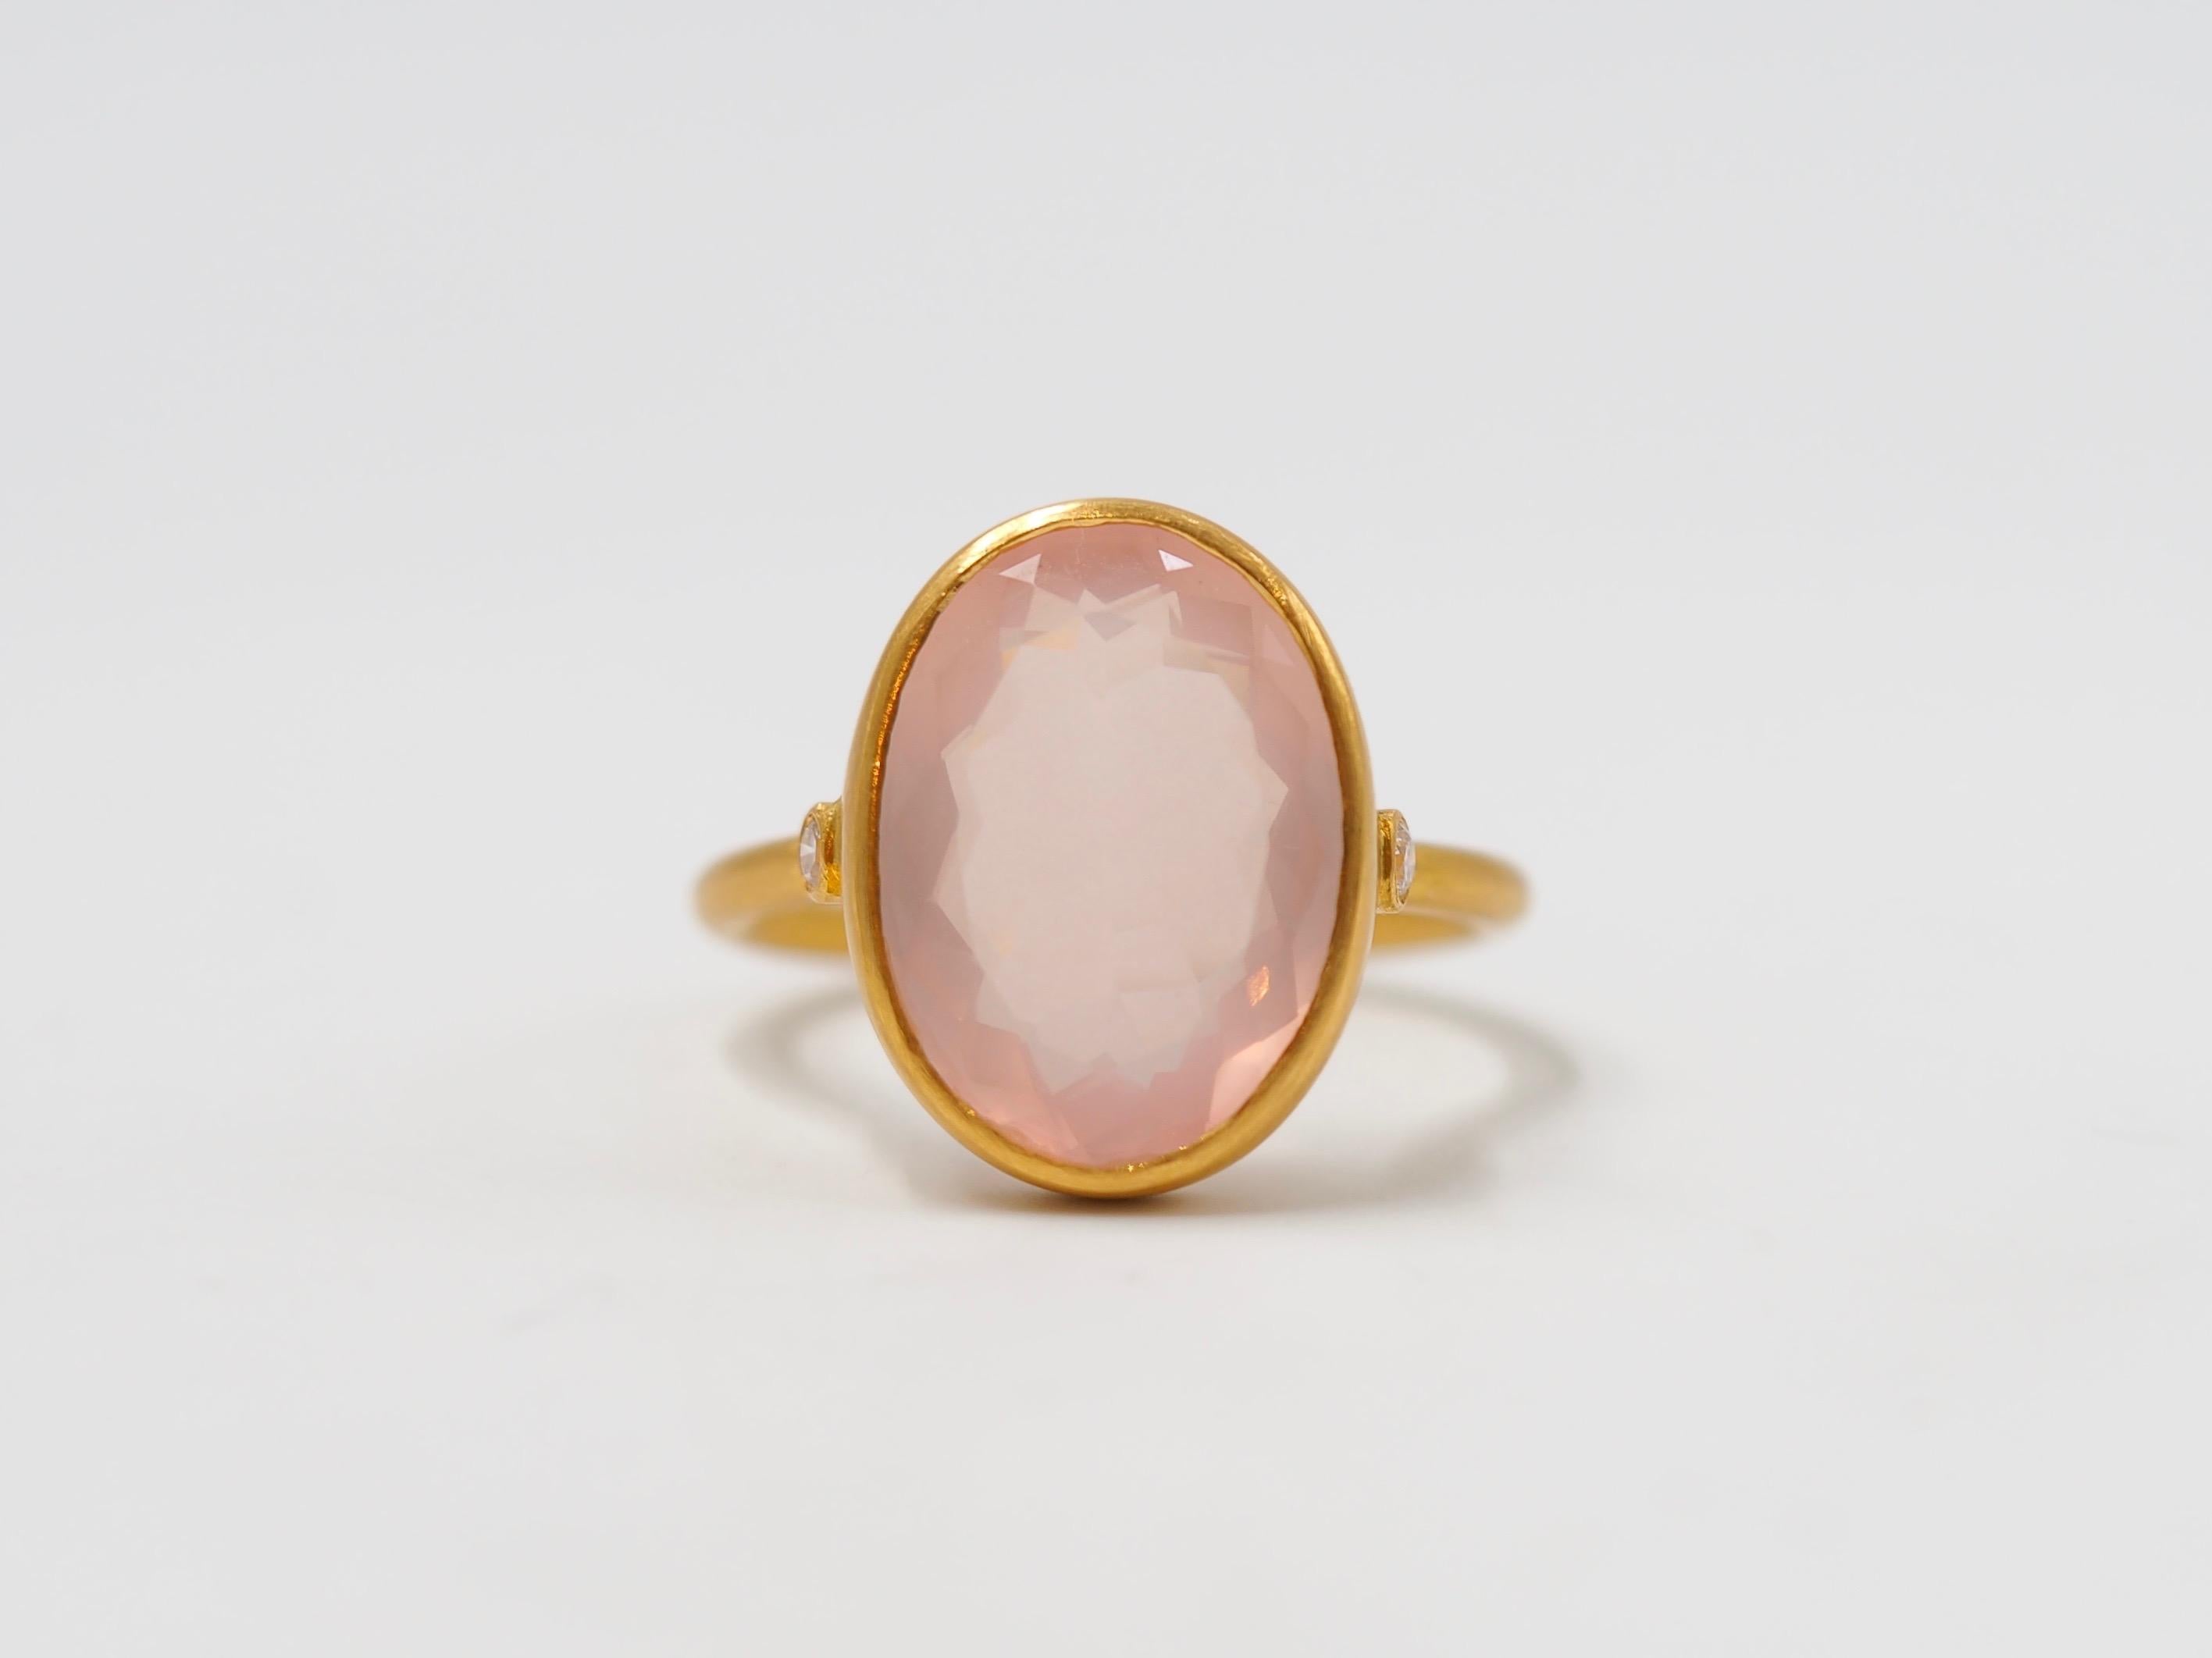 This delicate ring by Scrives is composed of a faceted rose quartz of 6cts and 2 small white diamonds on the side. 

The stone is a natural rose quartz and can exhibit natural and typical inclusions but not eye visible. 

This one-of-a-kind ring is